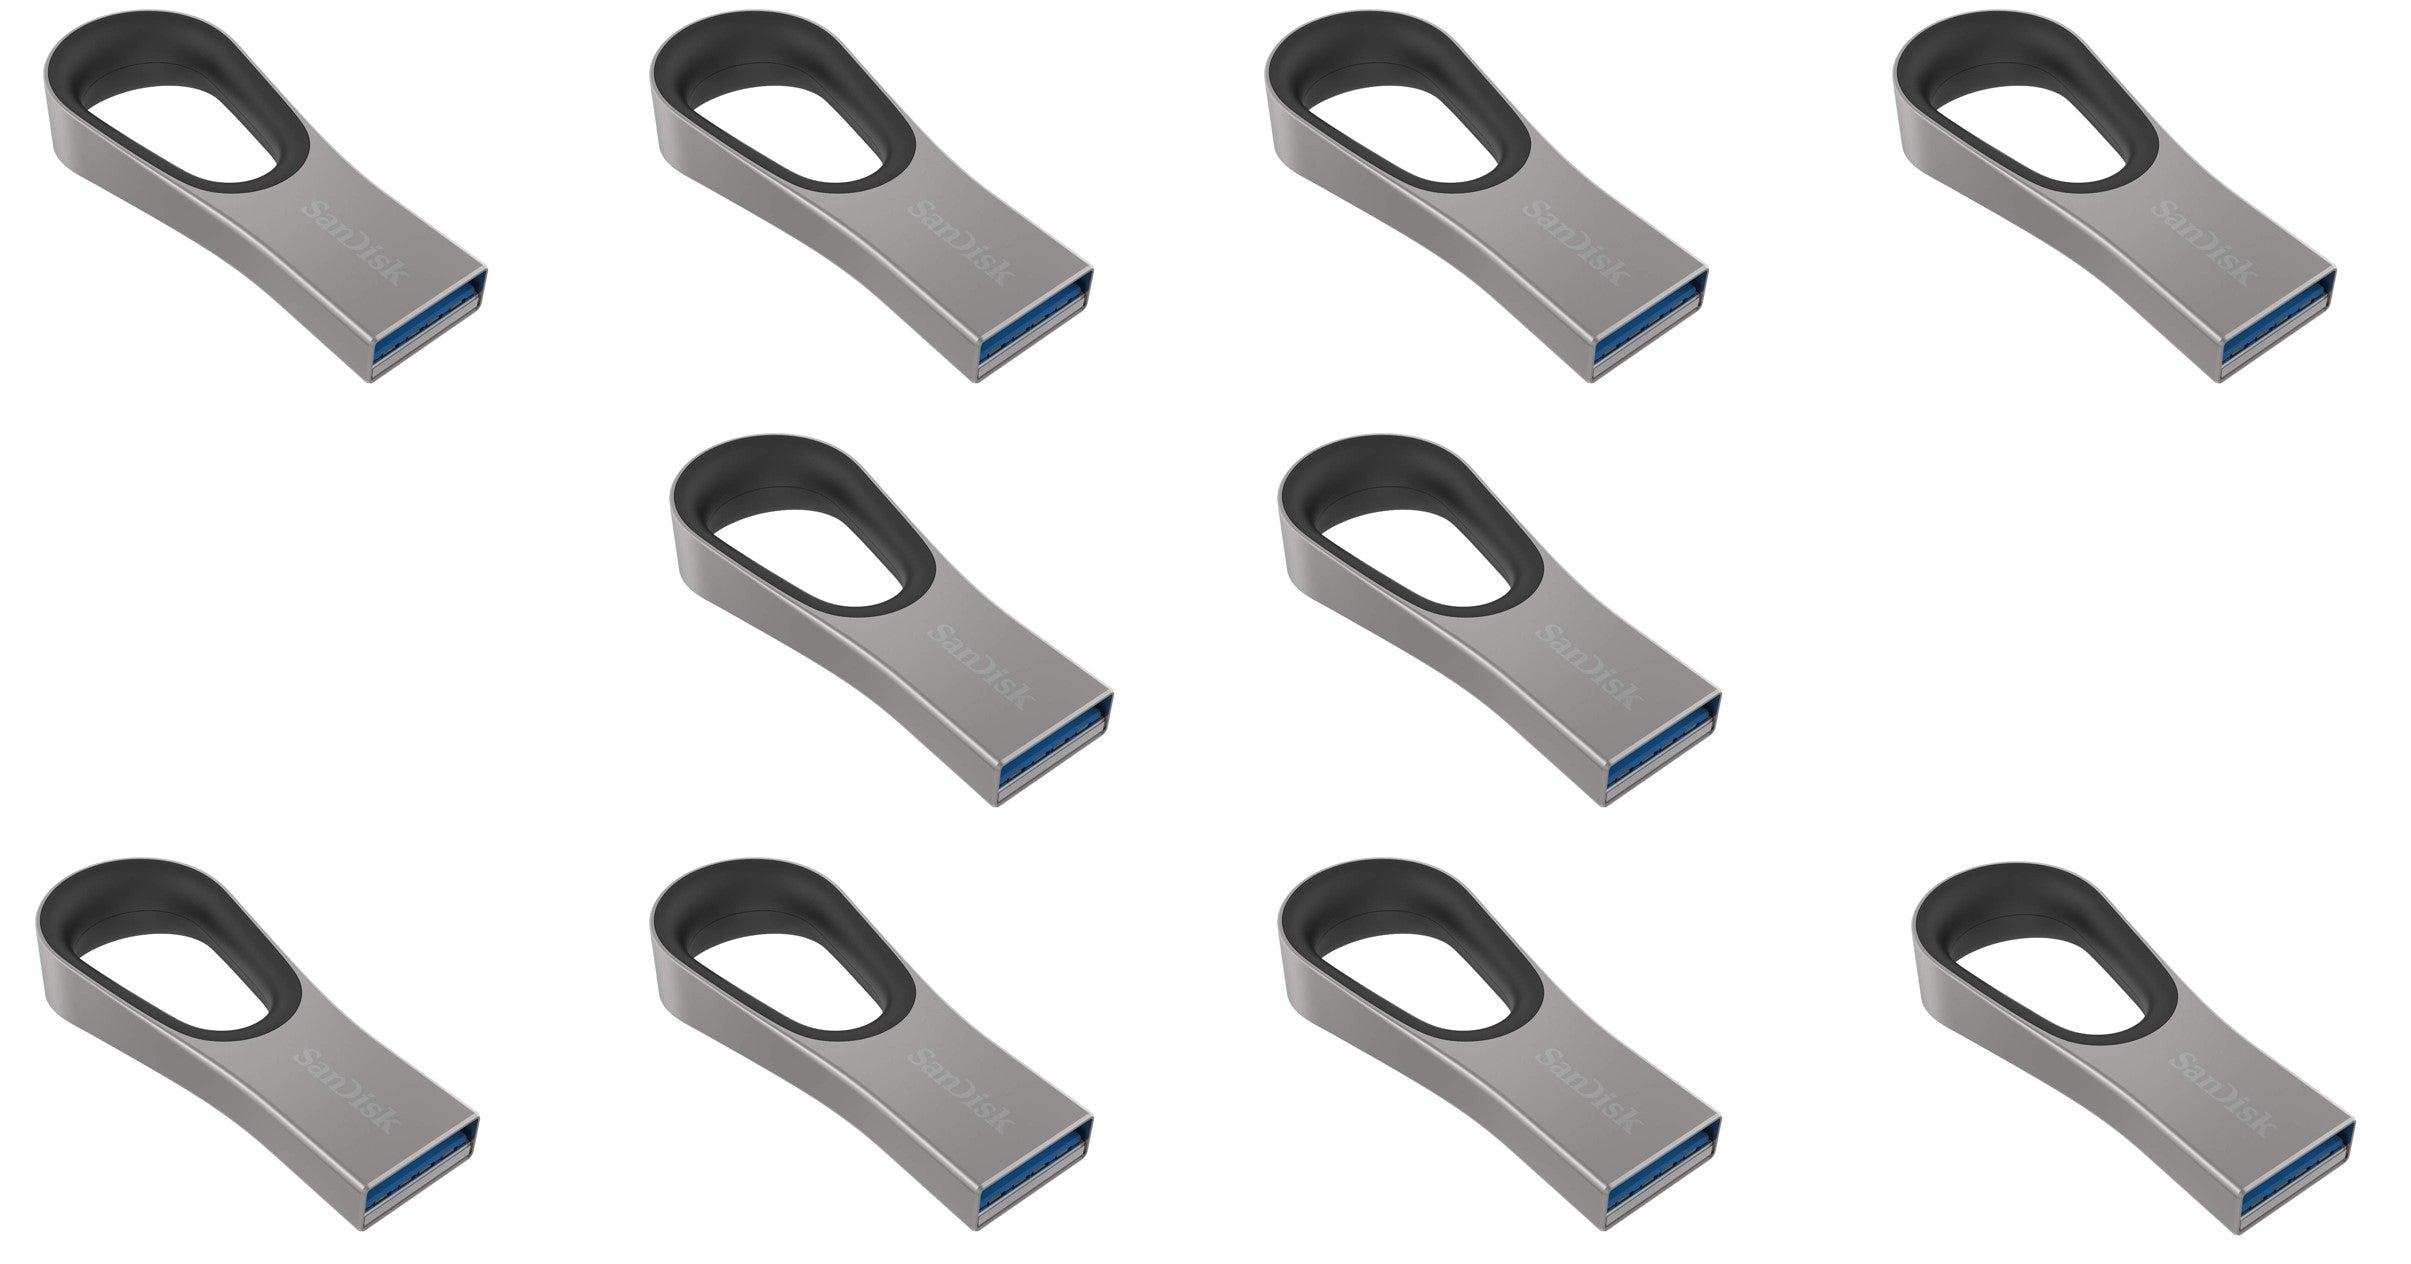 SanDisk 64GB Ultra Loop USB 3.0 Flash Drive - SDCZ93-064G-G46, Pack of 10